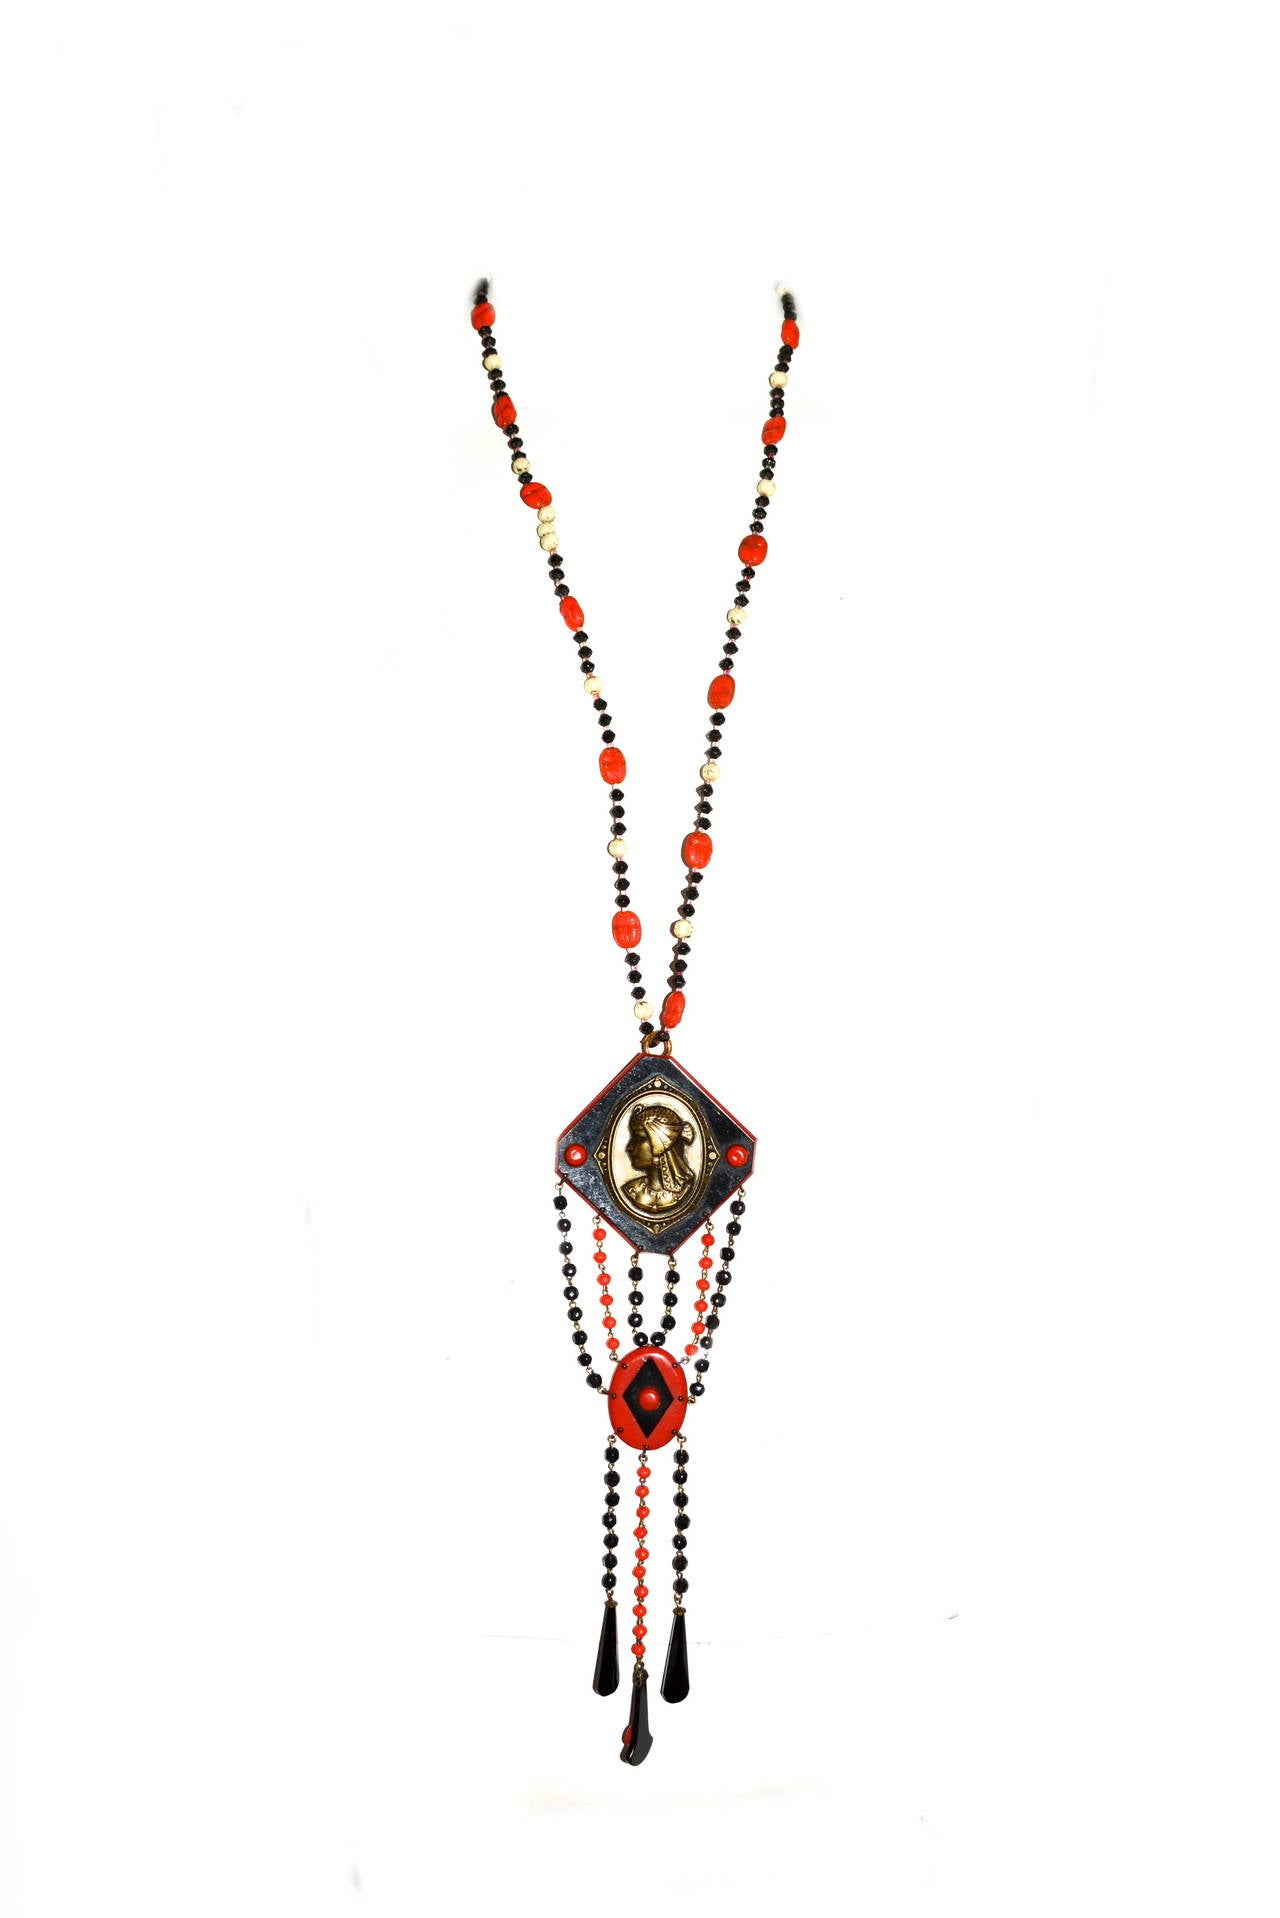 Art deco black, red, and white czech glass Egyptian revival necklace, unsigned. From a larger lifelong Egyptian revival jewelry collection. I believe the scarab necklace is by Max Neiger. The large piece seem to be originally a belt buckle which